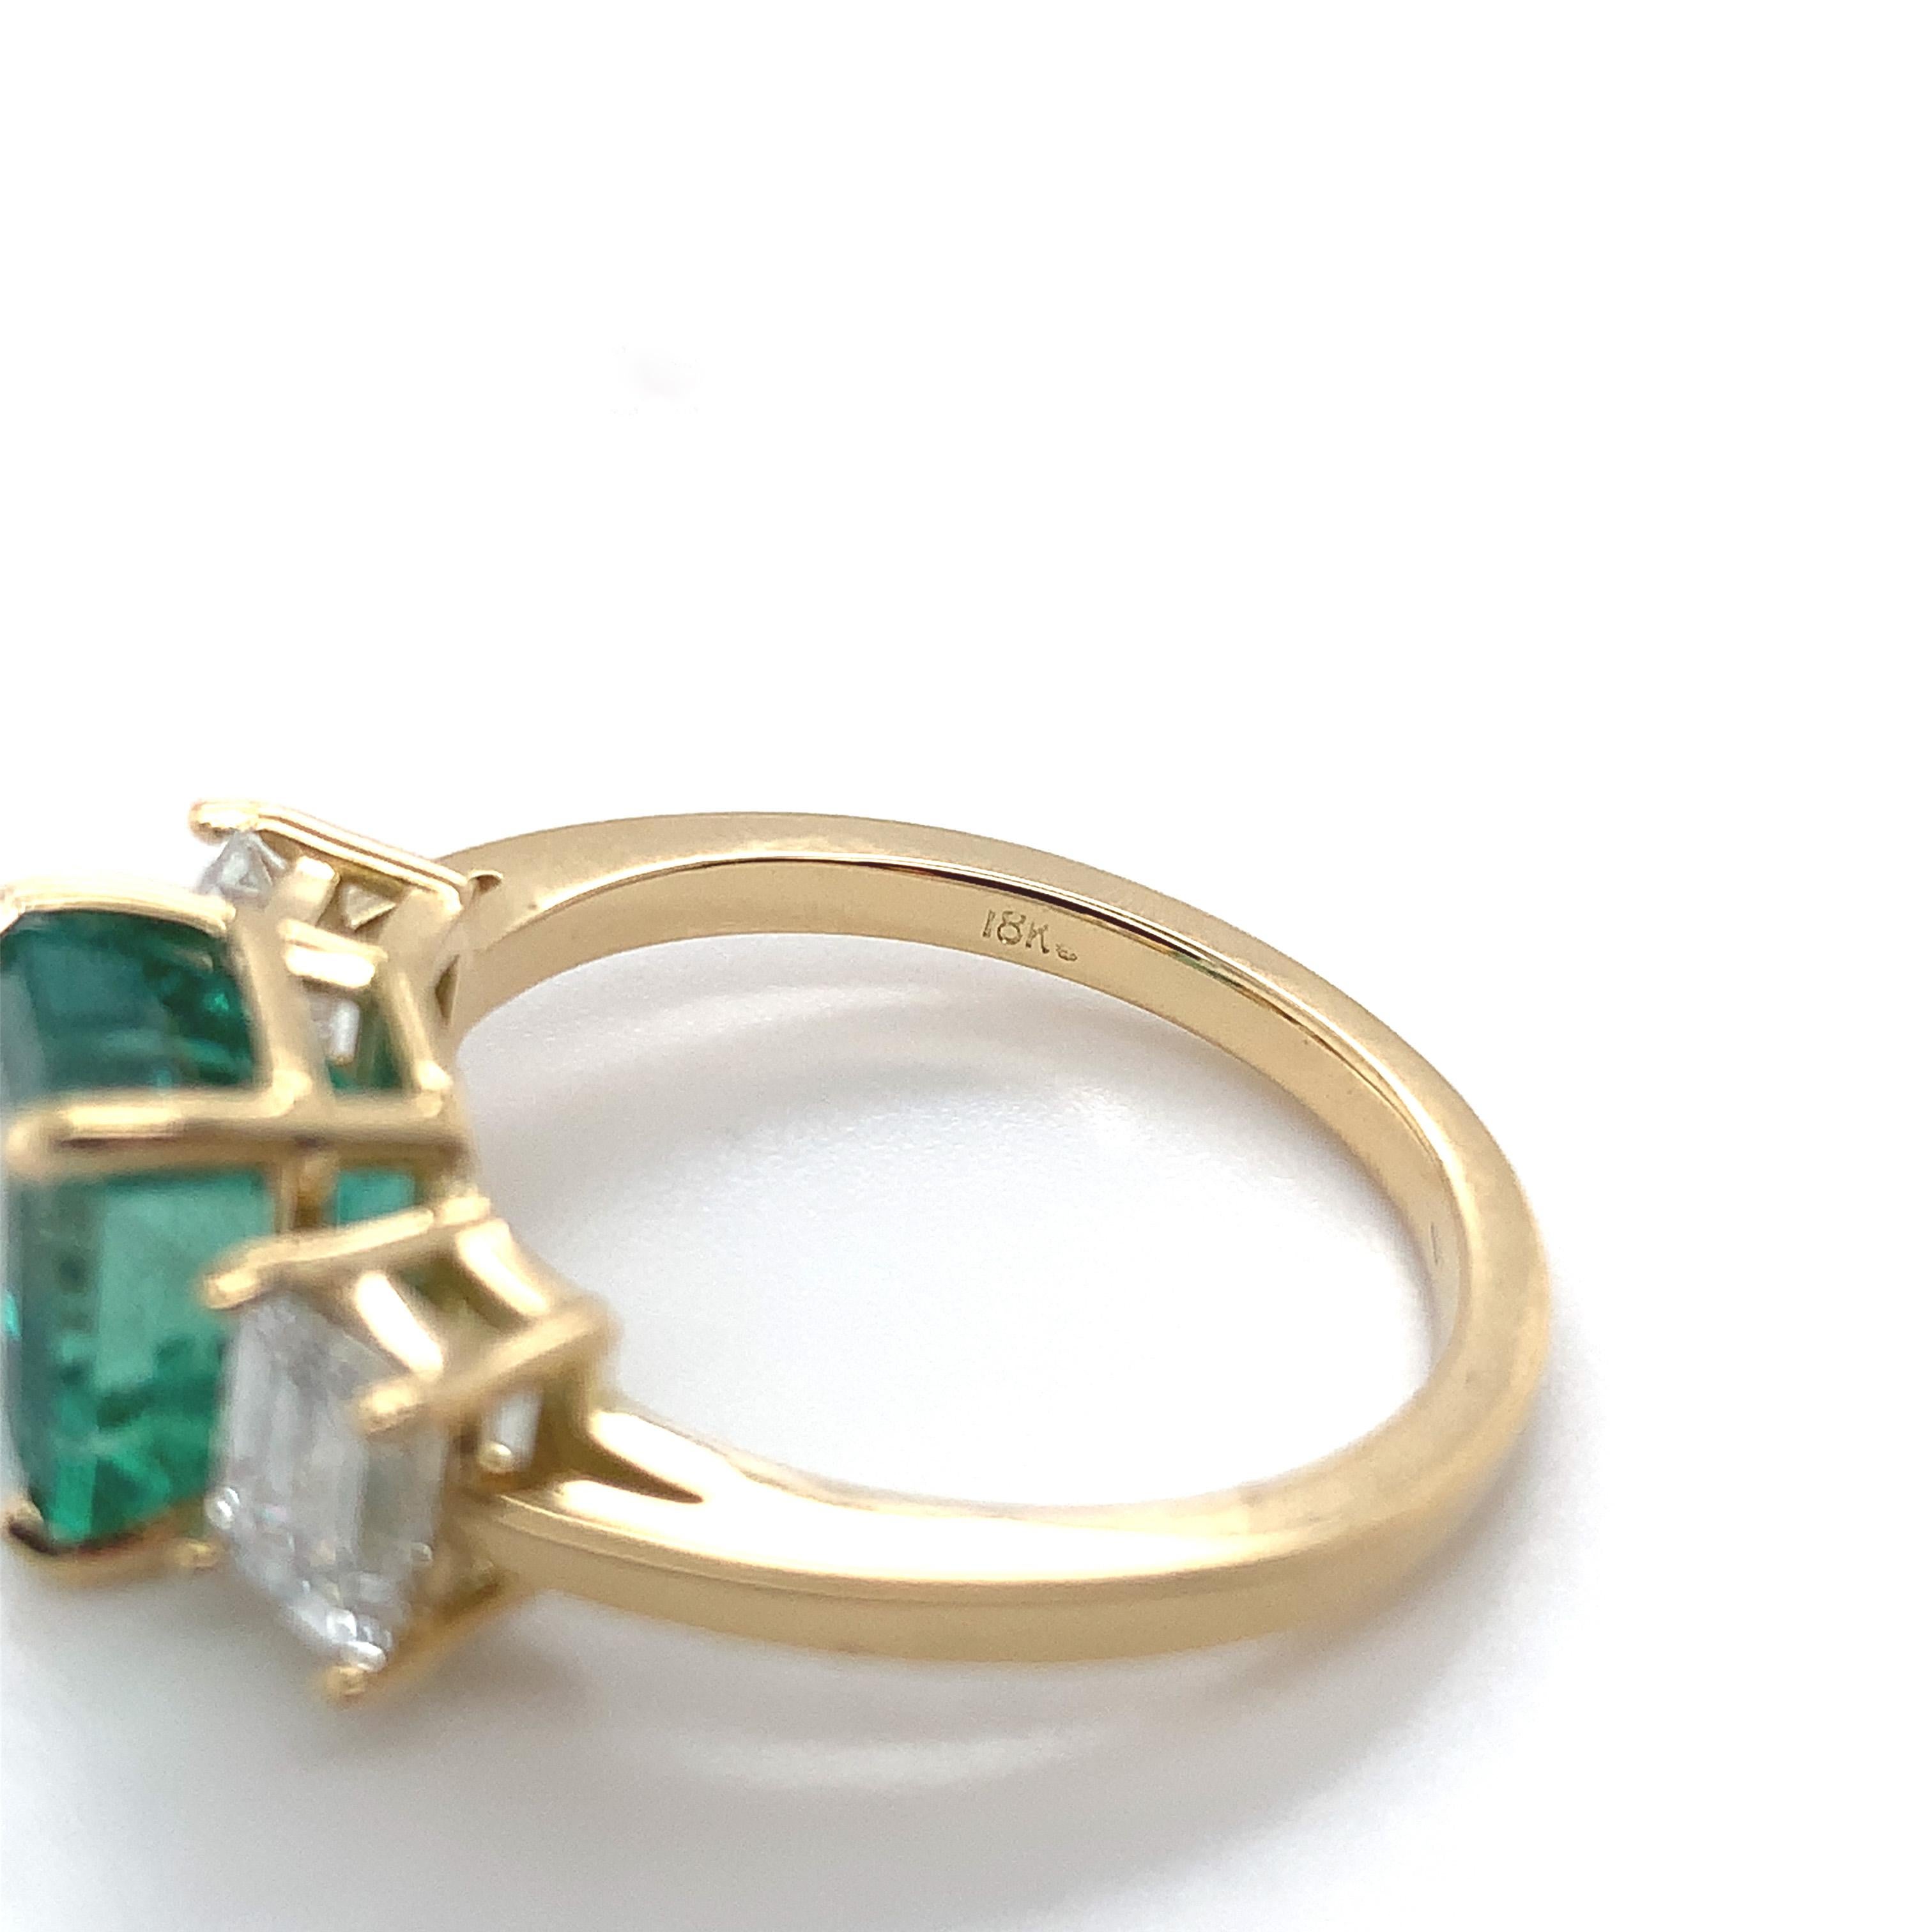 18K Yellow Gold GIA 2.86 carat Emerald and 1.02 carat Diamond Ring For Sale 4